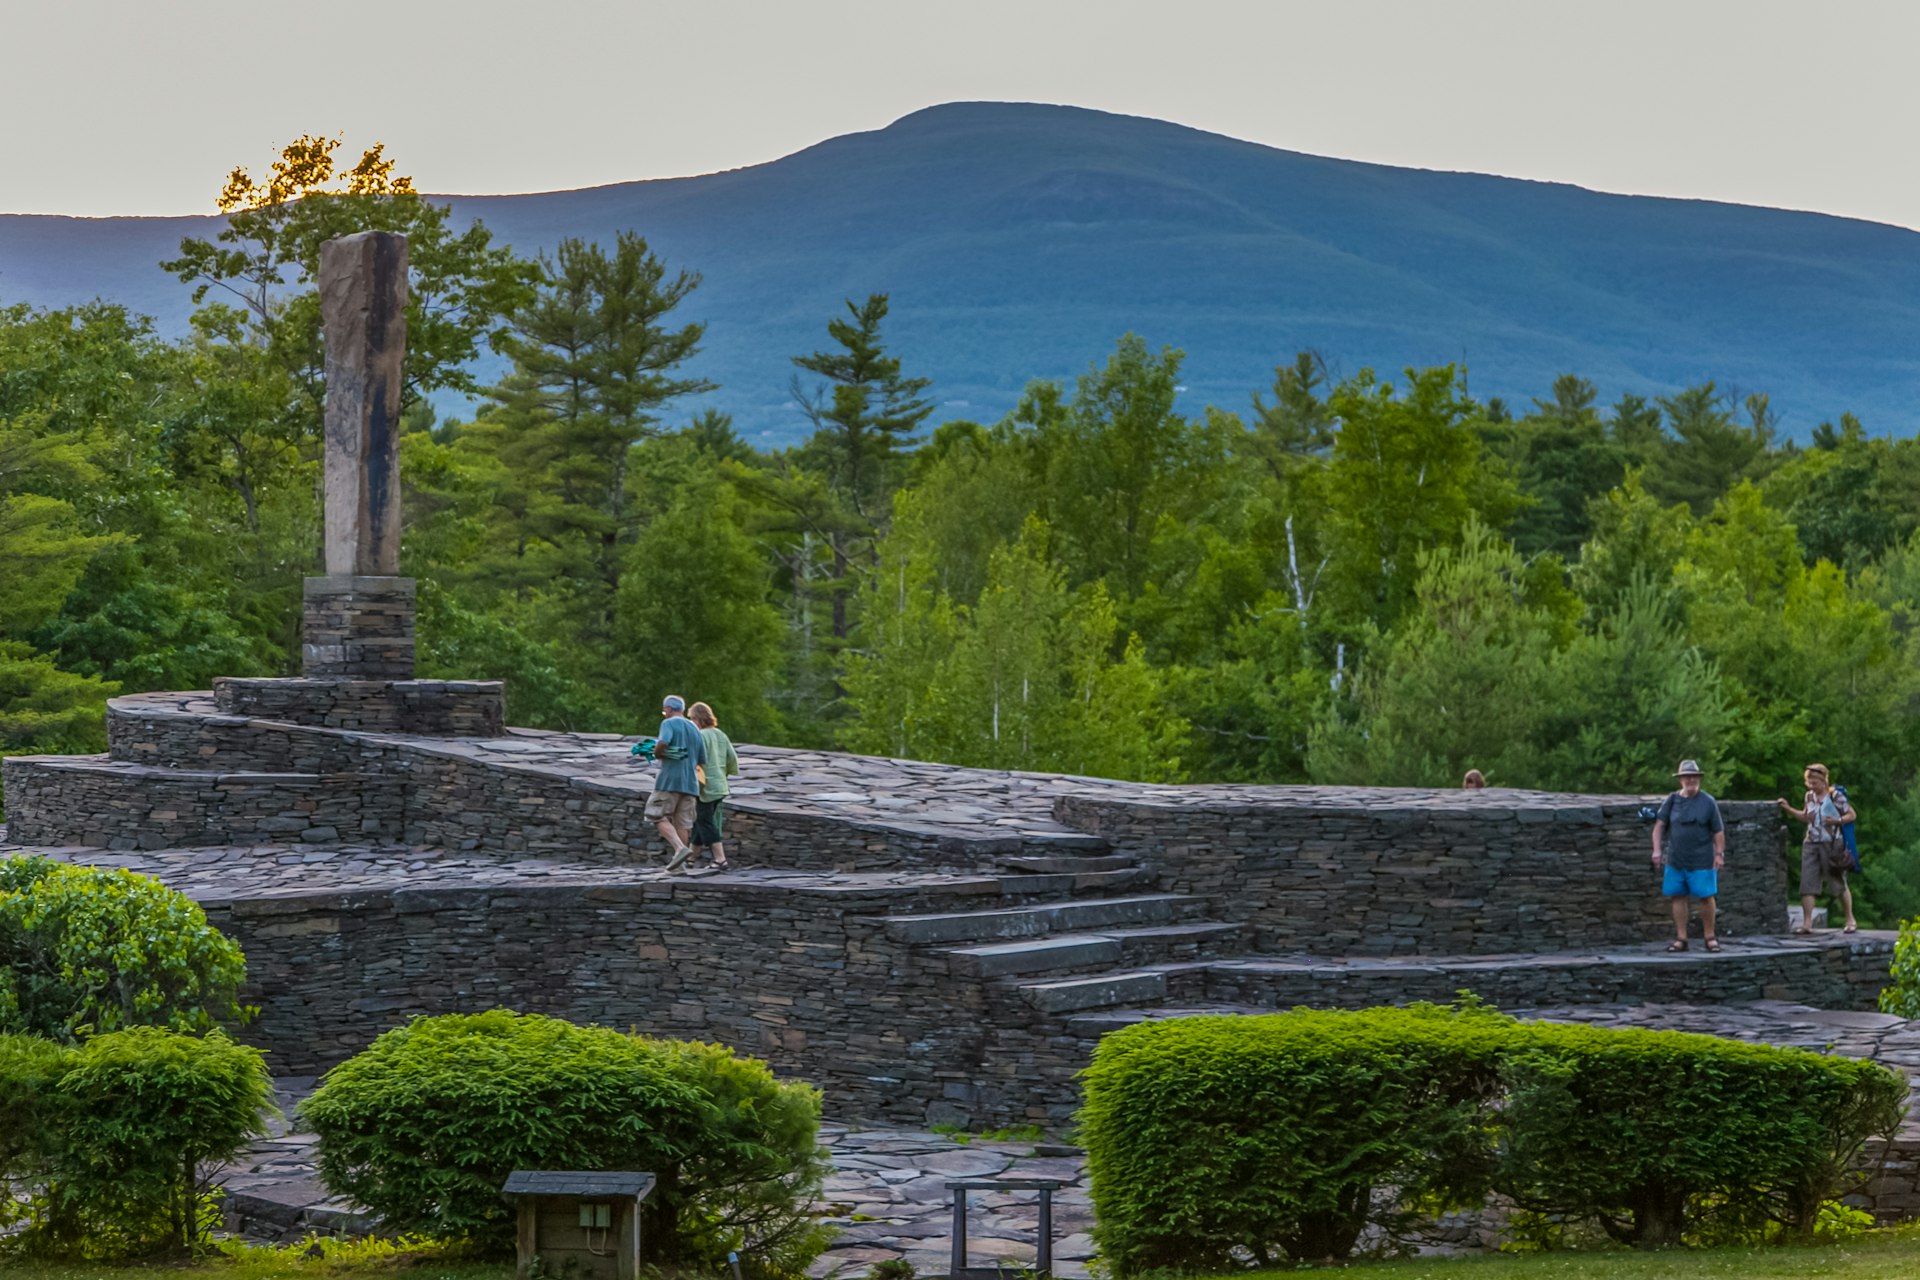 People walking over the sprawling Opus 40 earthwork sculpture in Saugerties, in the heart of New York's Hudson Valley